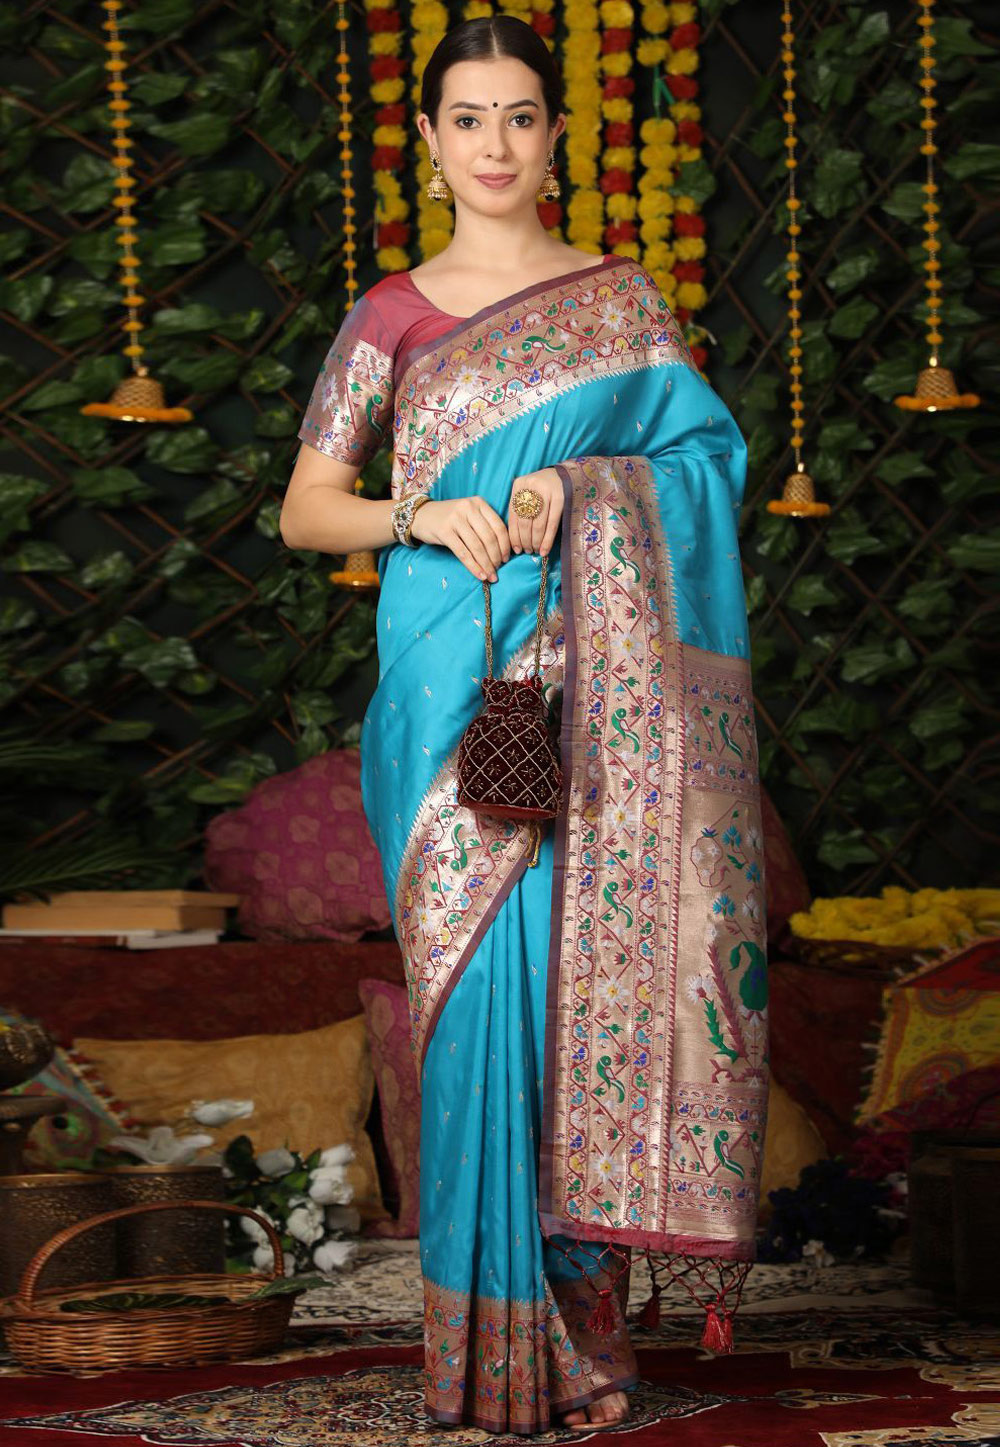 Morpitchh color modal Silk With Silver Zari Weaving Sari With Matching  Blouse - Mr & Mrs Creation - 4093883